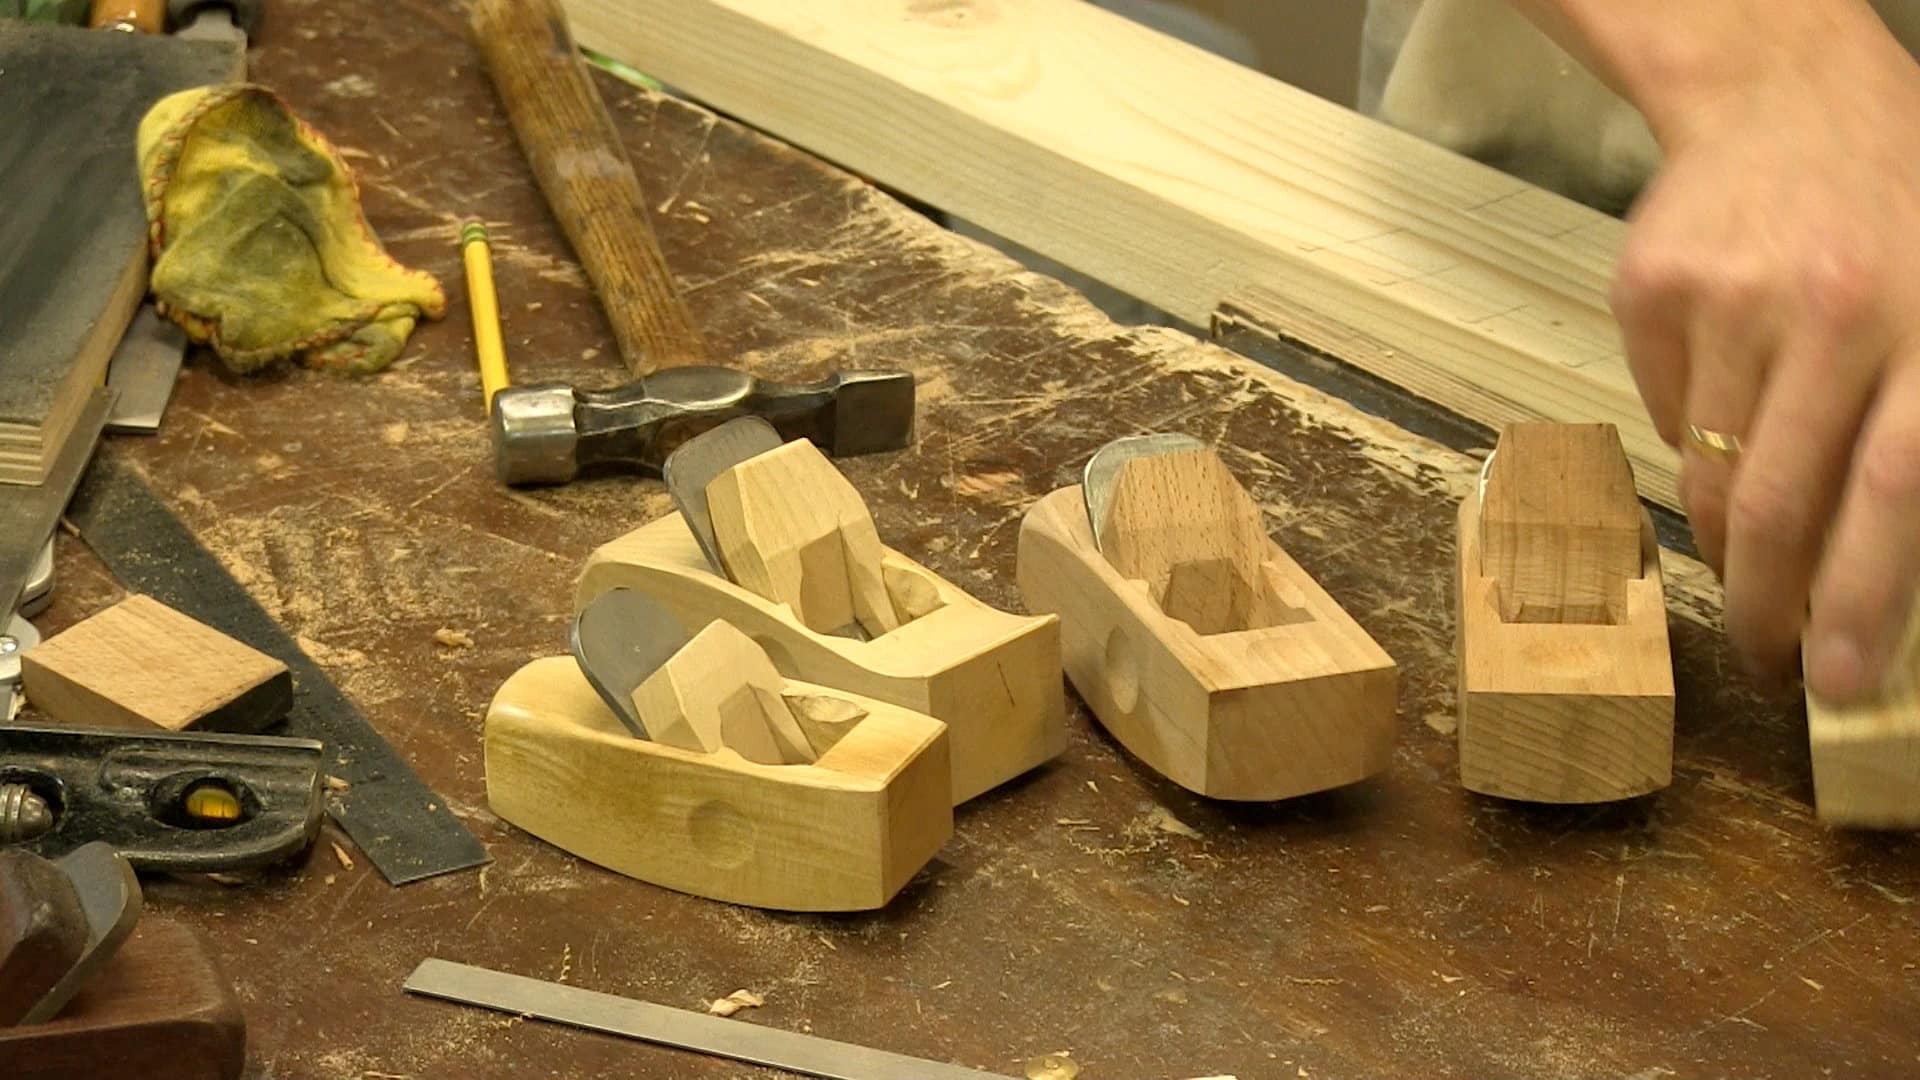 Making a Wooden Plane – Episode 3